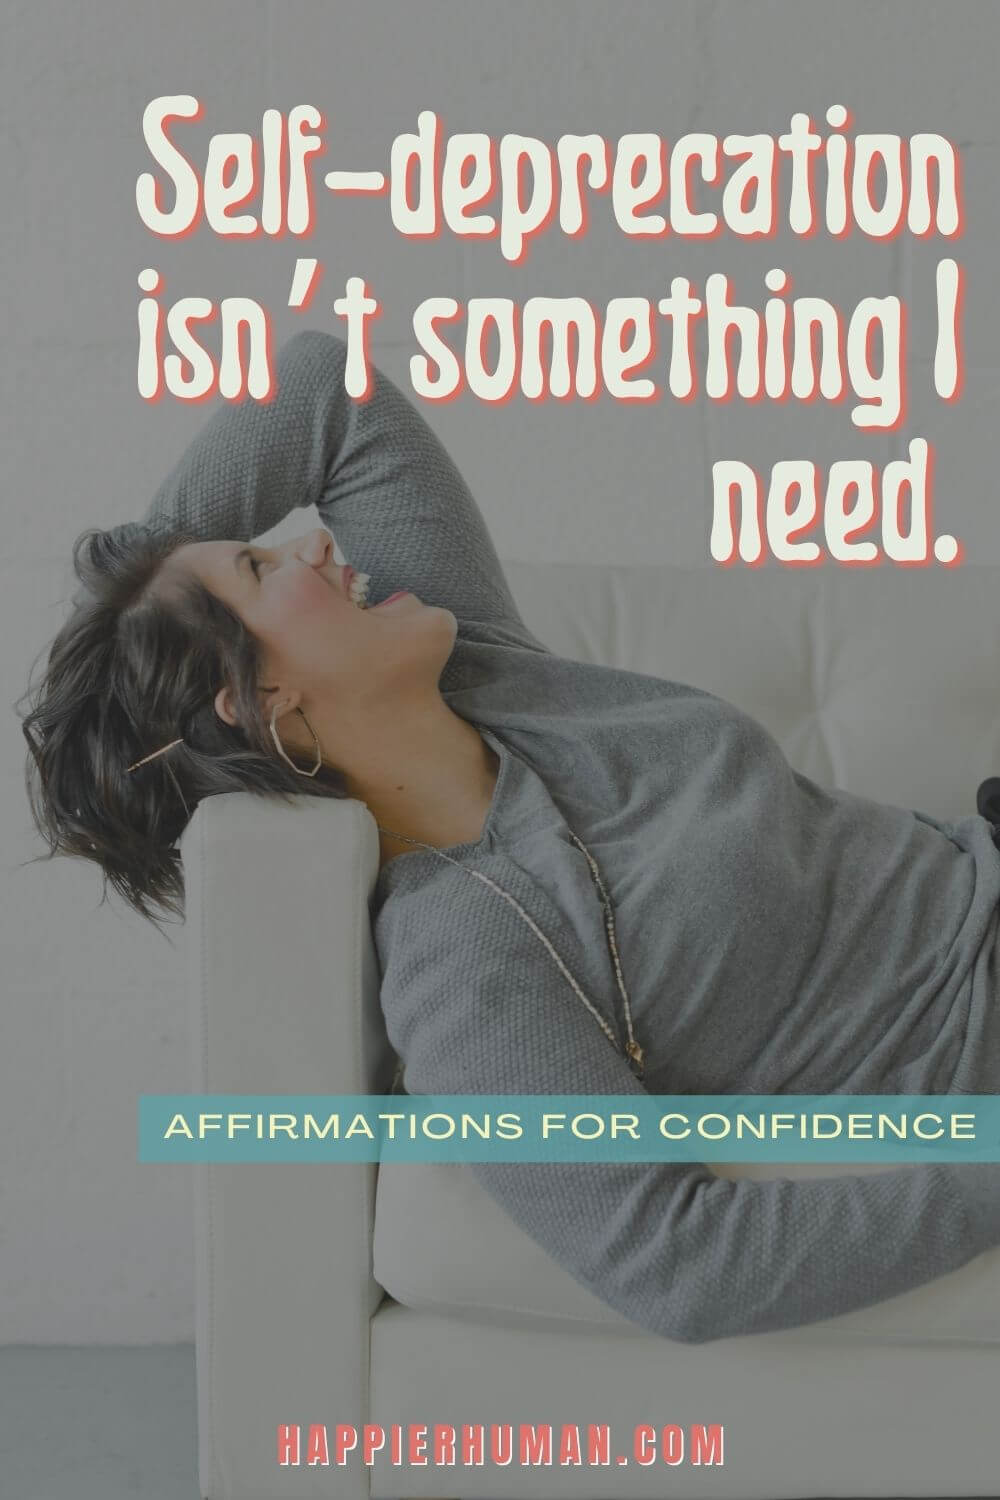 Affirmations for Confidence - Self-deprecation isn’t something I need. | spiritual affirmations for confidence | affirmations for confidence at work | affirmations for confidence and health #affirmations #confidence #selfesteem